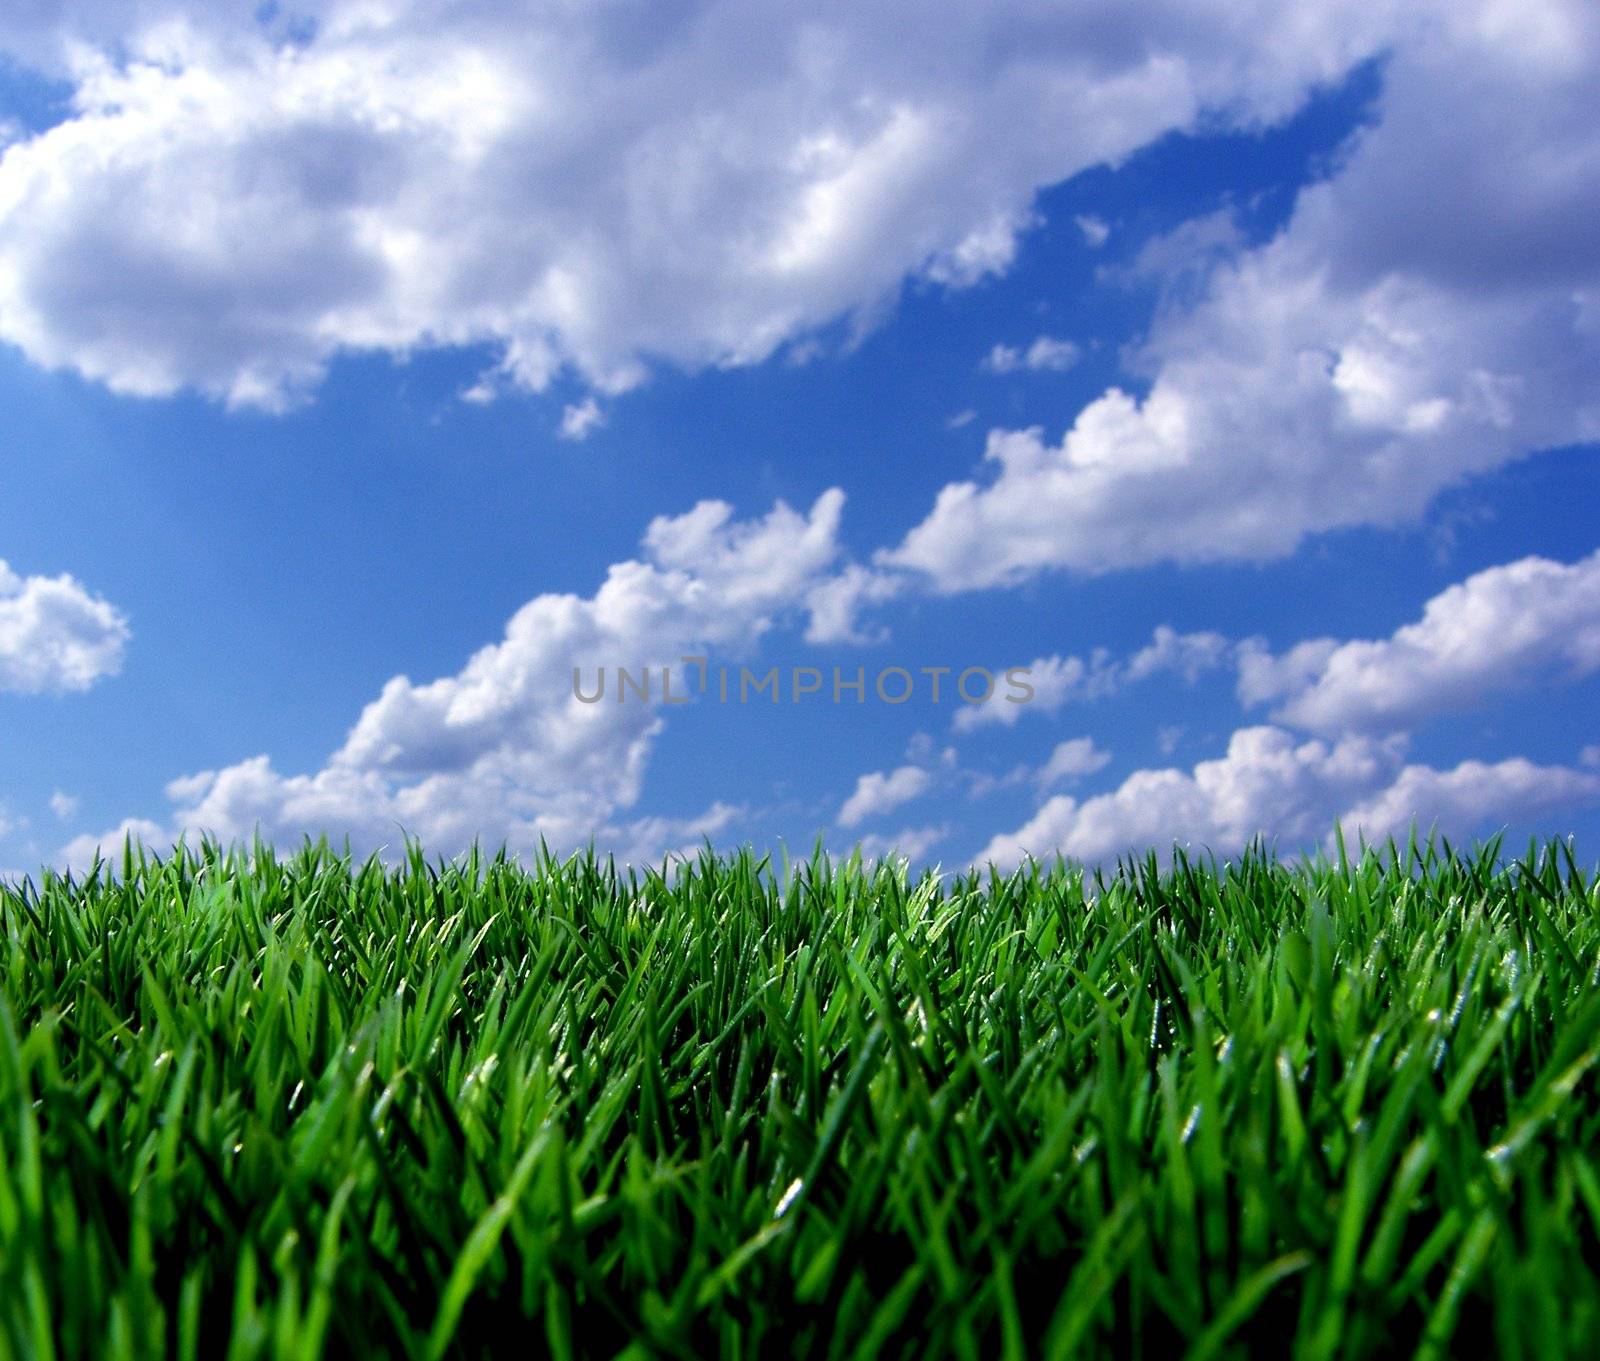 blue sky with cloud and gras in front